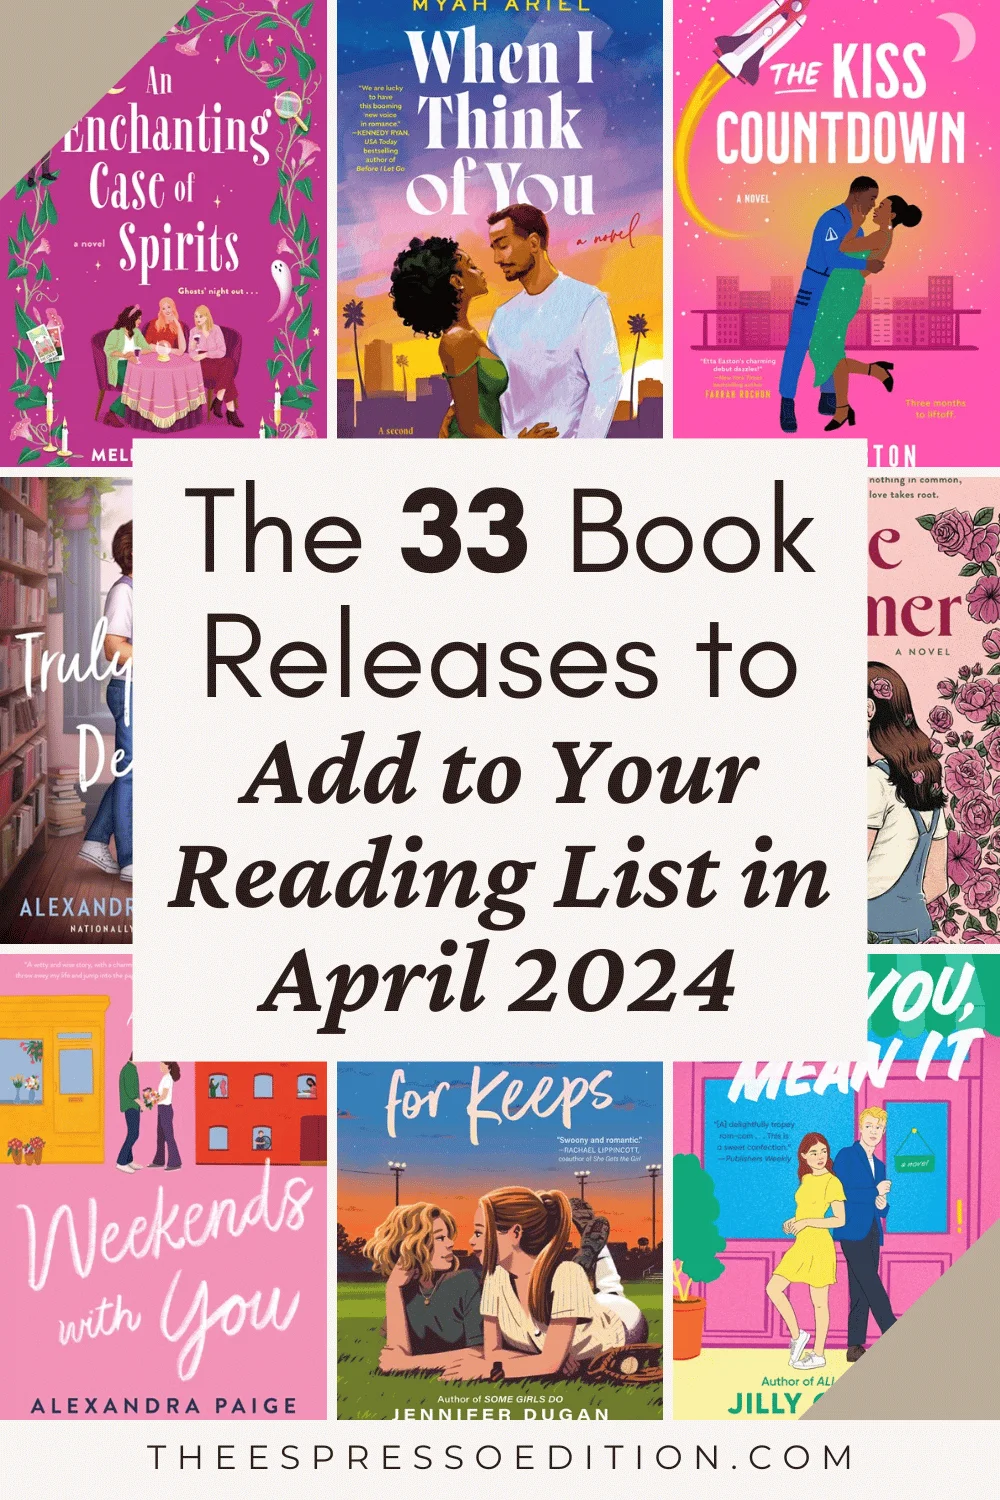 The 33 Book Releases to Add to Your Reading List in April 2024 by The Espresso Edition cozy bookish blog